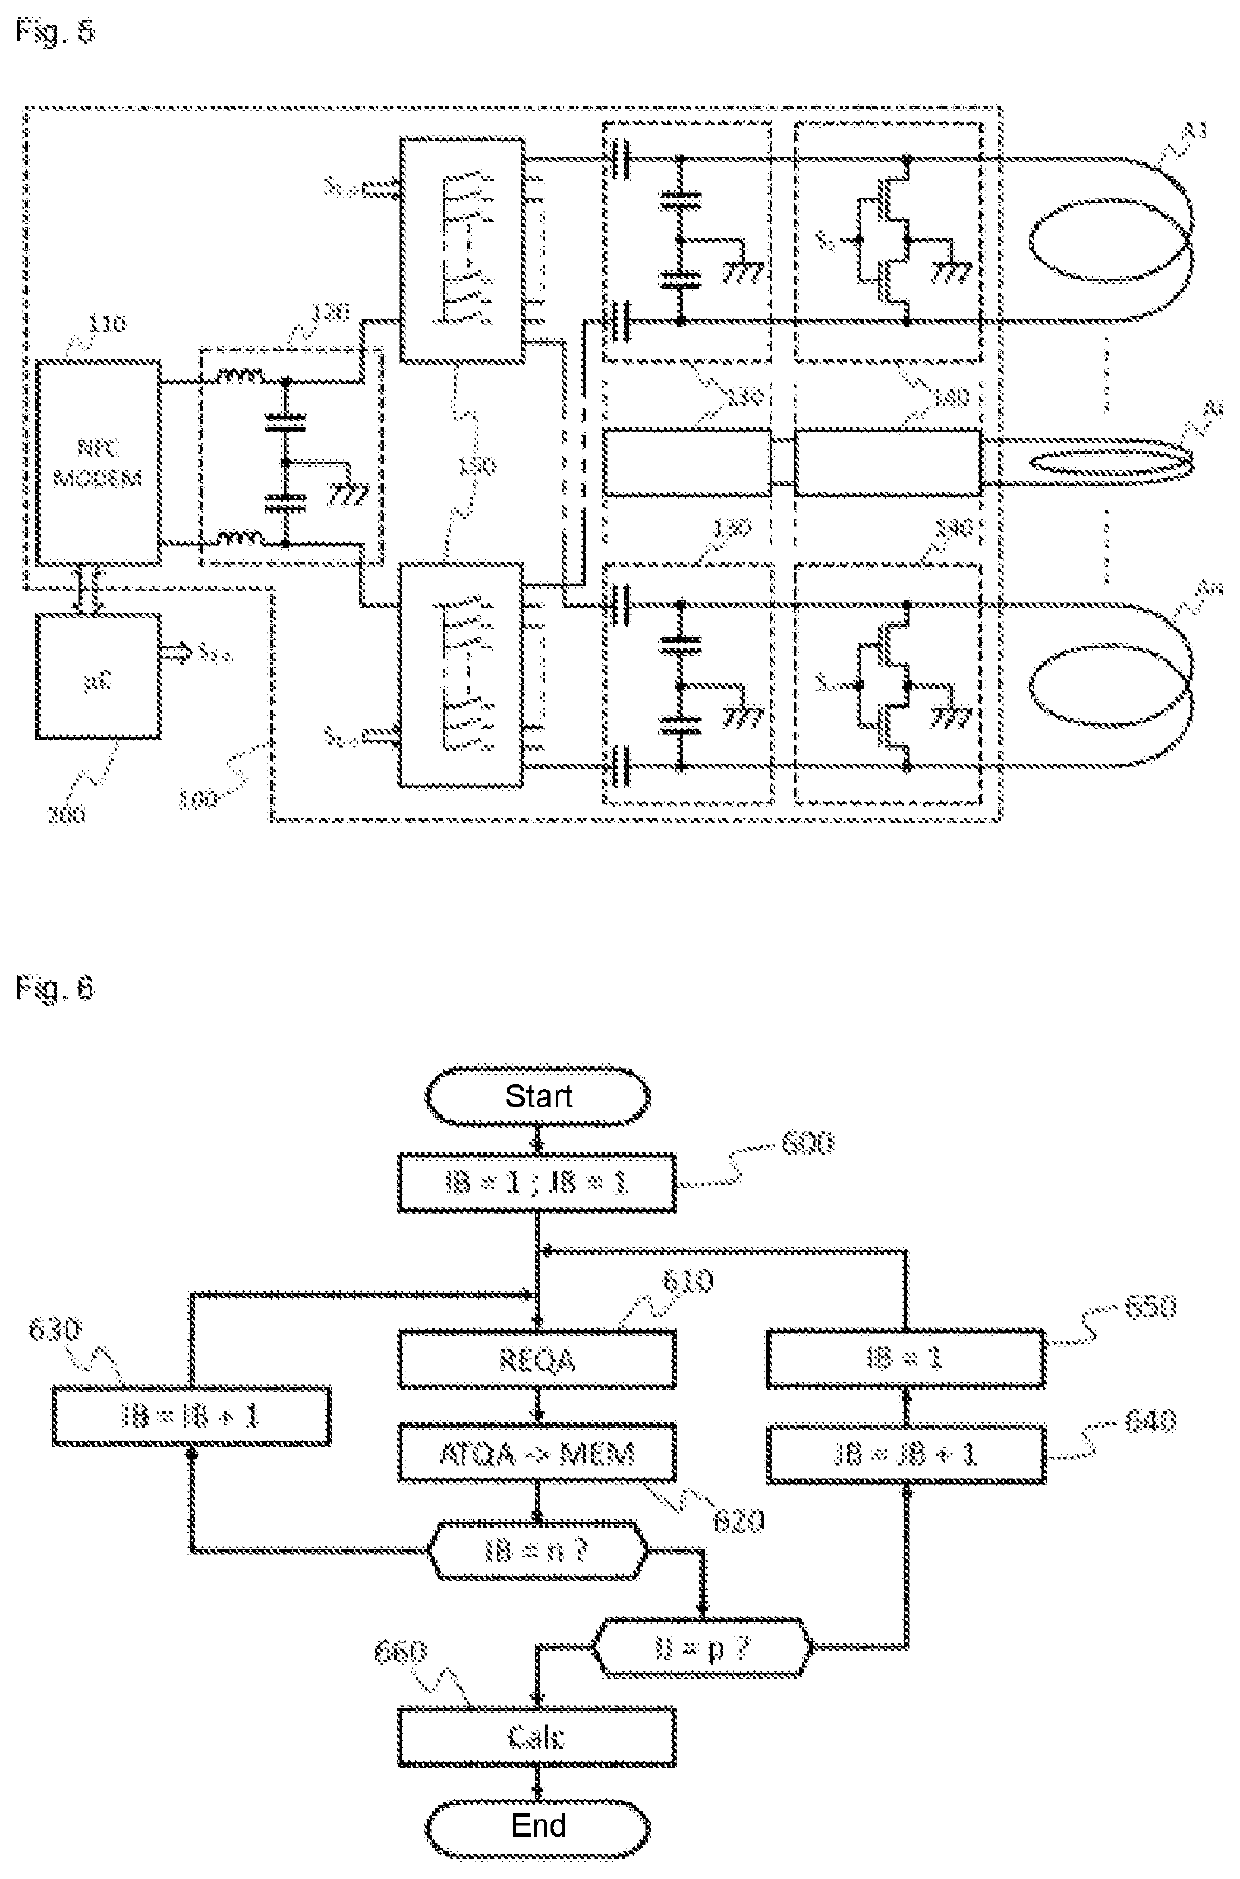 Near-field communication surface and method for locating on said surface